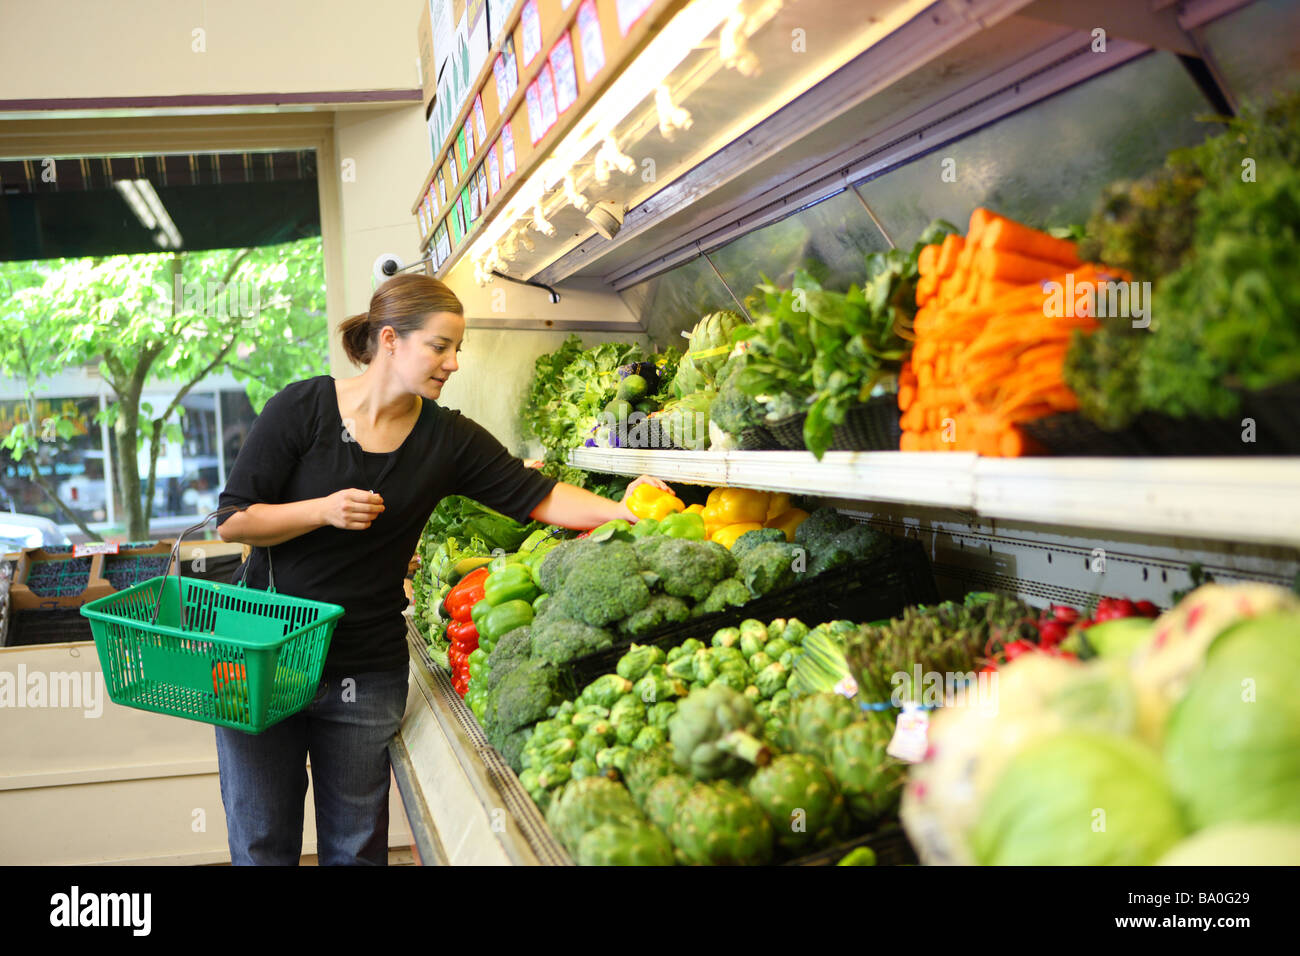 Woman shopping for produce in grocery store Stock Photo